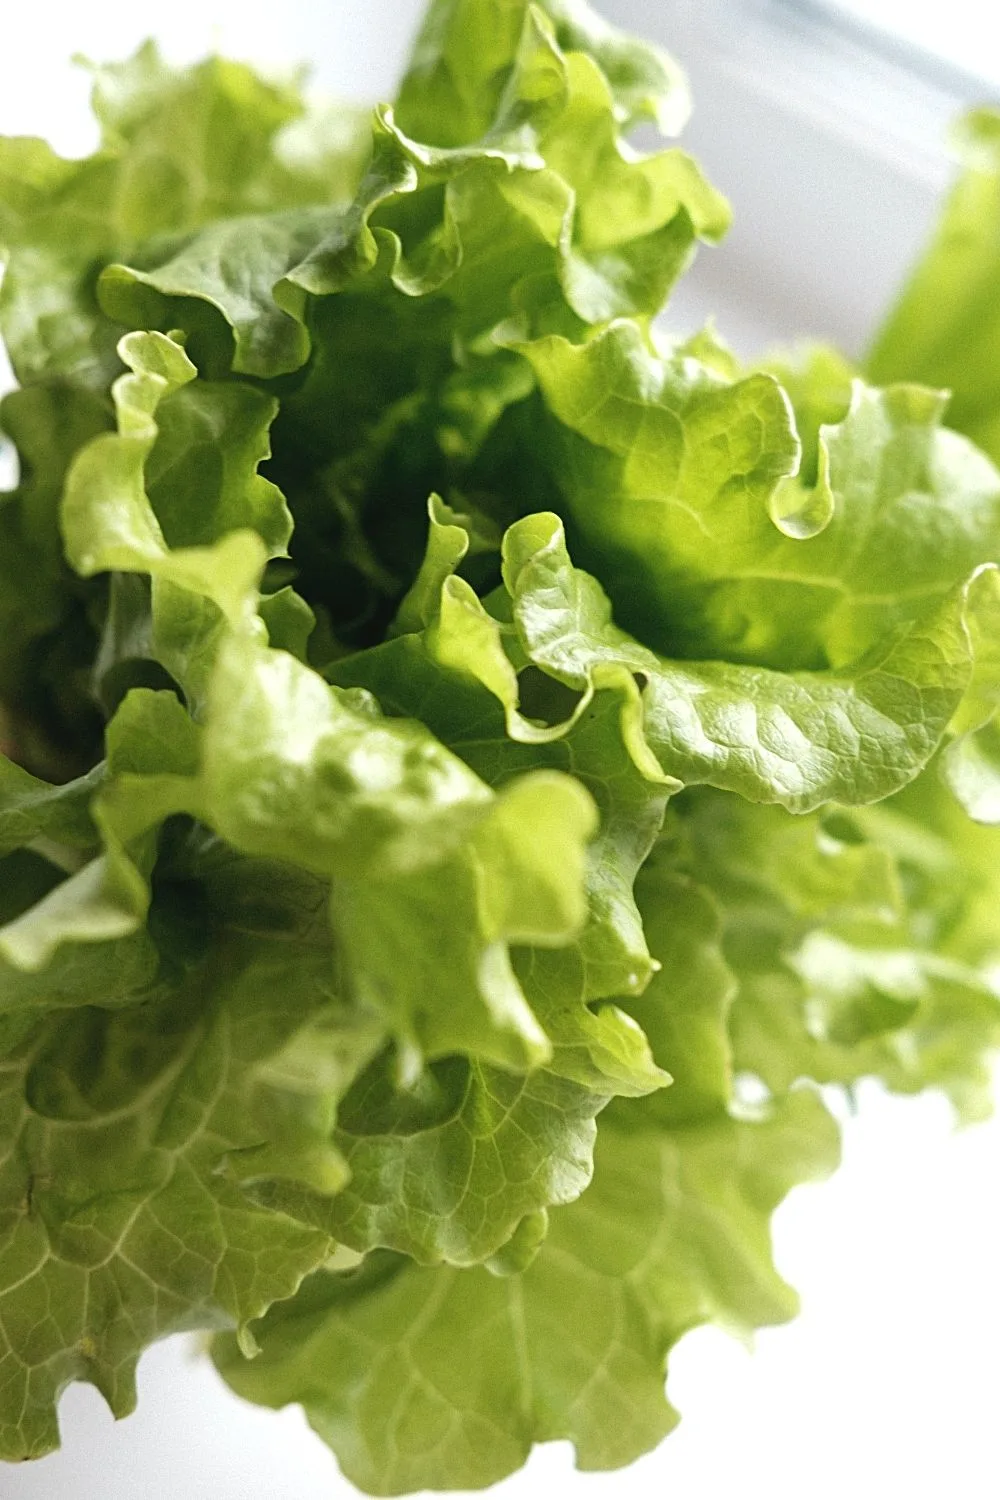 Lettuce is one of the vegetables that flourishes in raised garden beds